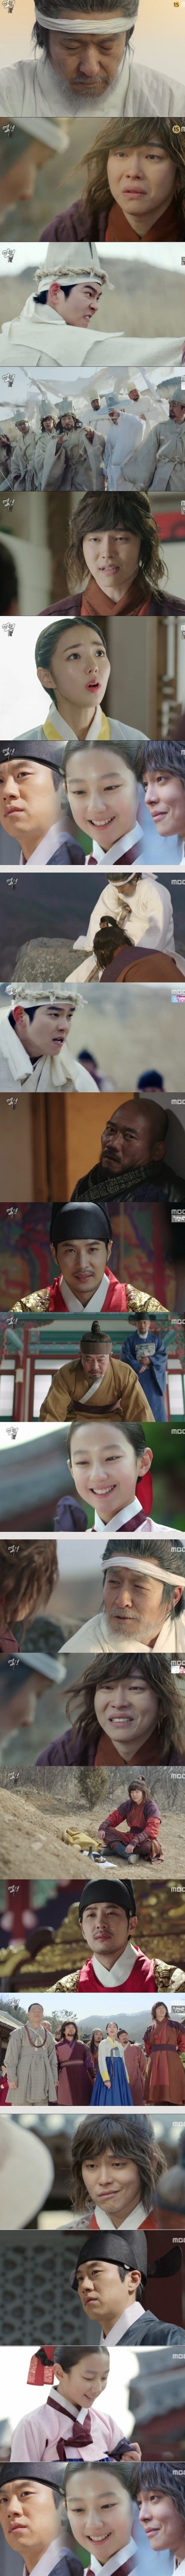 episode 14 captures for the Korean drama 'Rebel: Thief Who Stole the People'